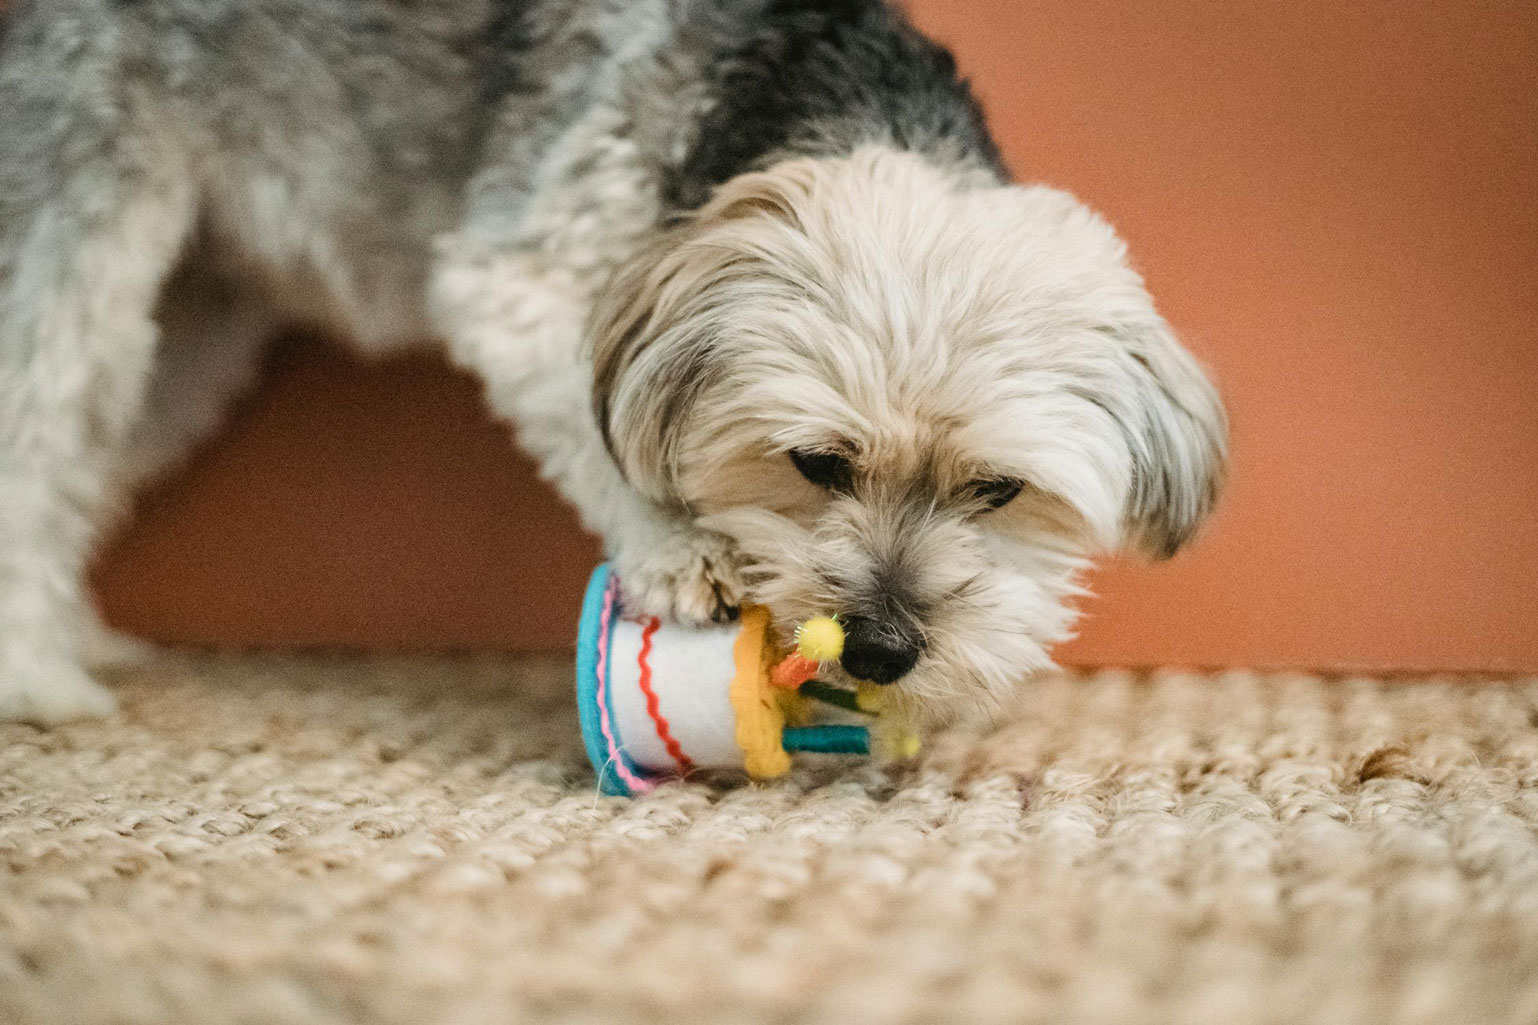 Dog playing with chew toy